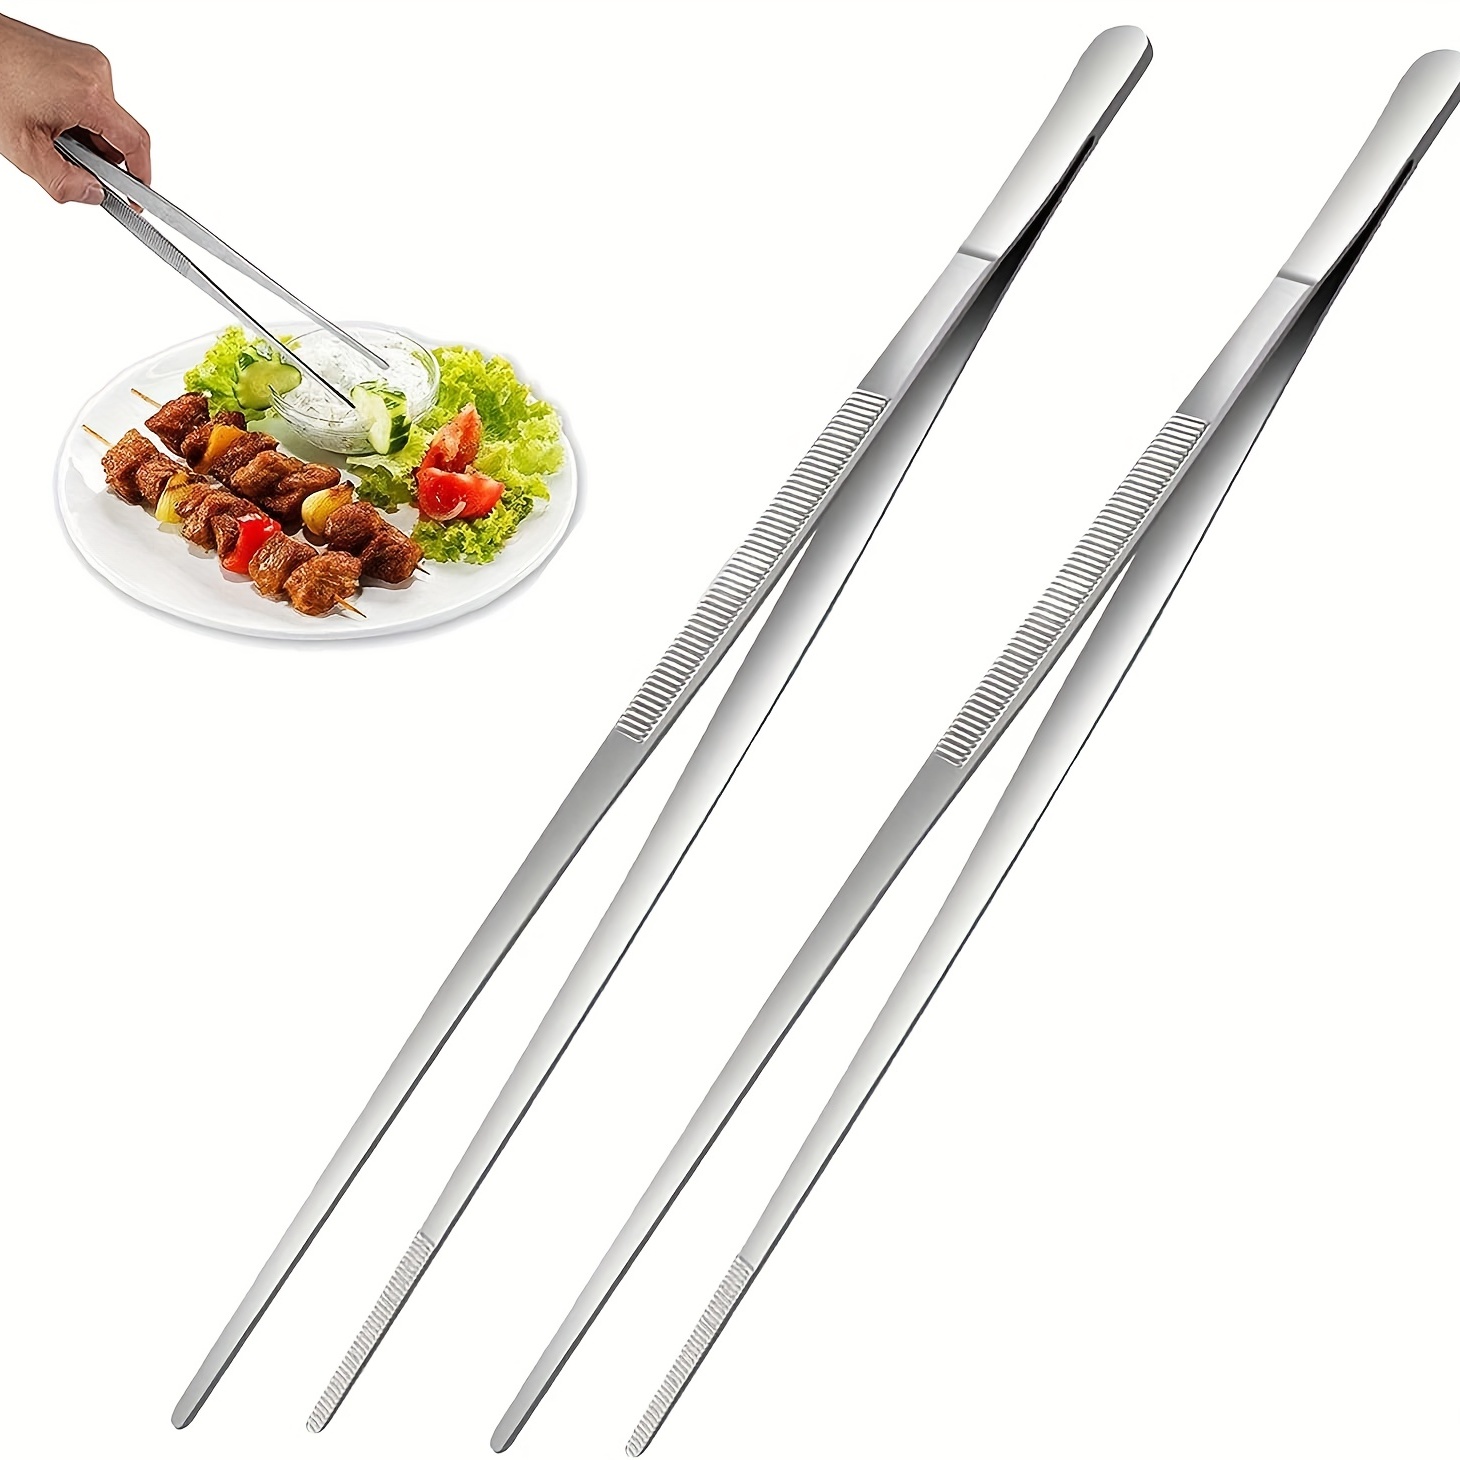 

2pcs Barbecue Accessories Food Tongs Food Clip Stainless Steel Churrasco Tweezers Clip Buffet Restaurant Tools Kitchen Gadgets, Outdoor Camping Picnic, Cookware Barbecue Tool Accessories